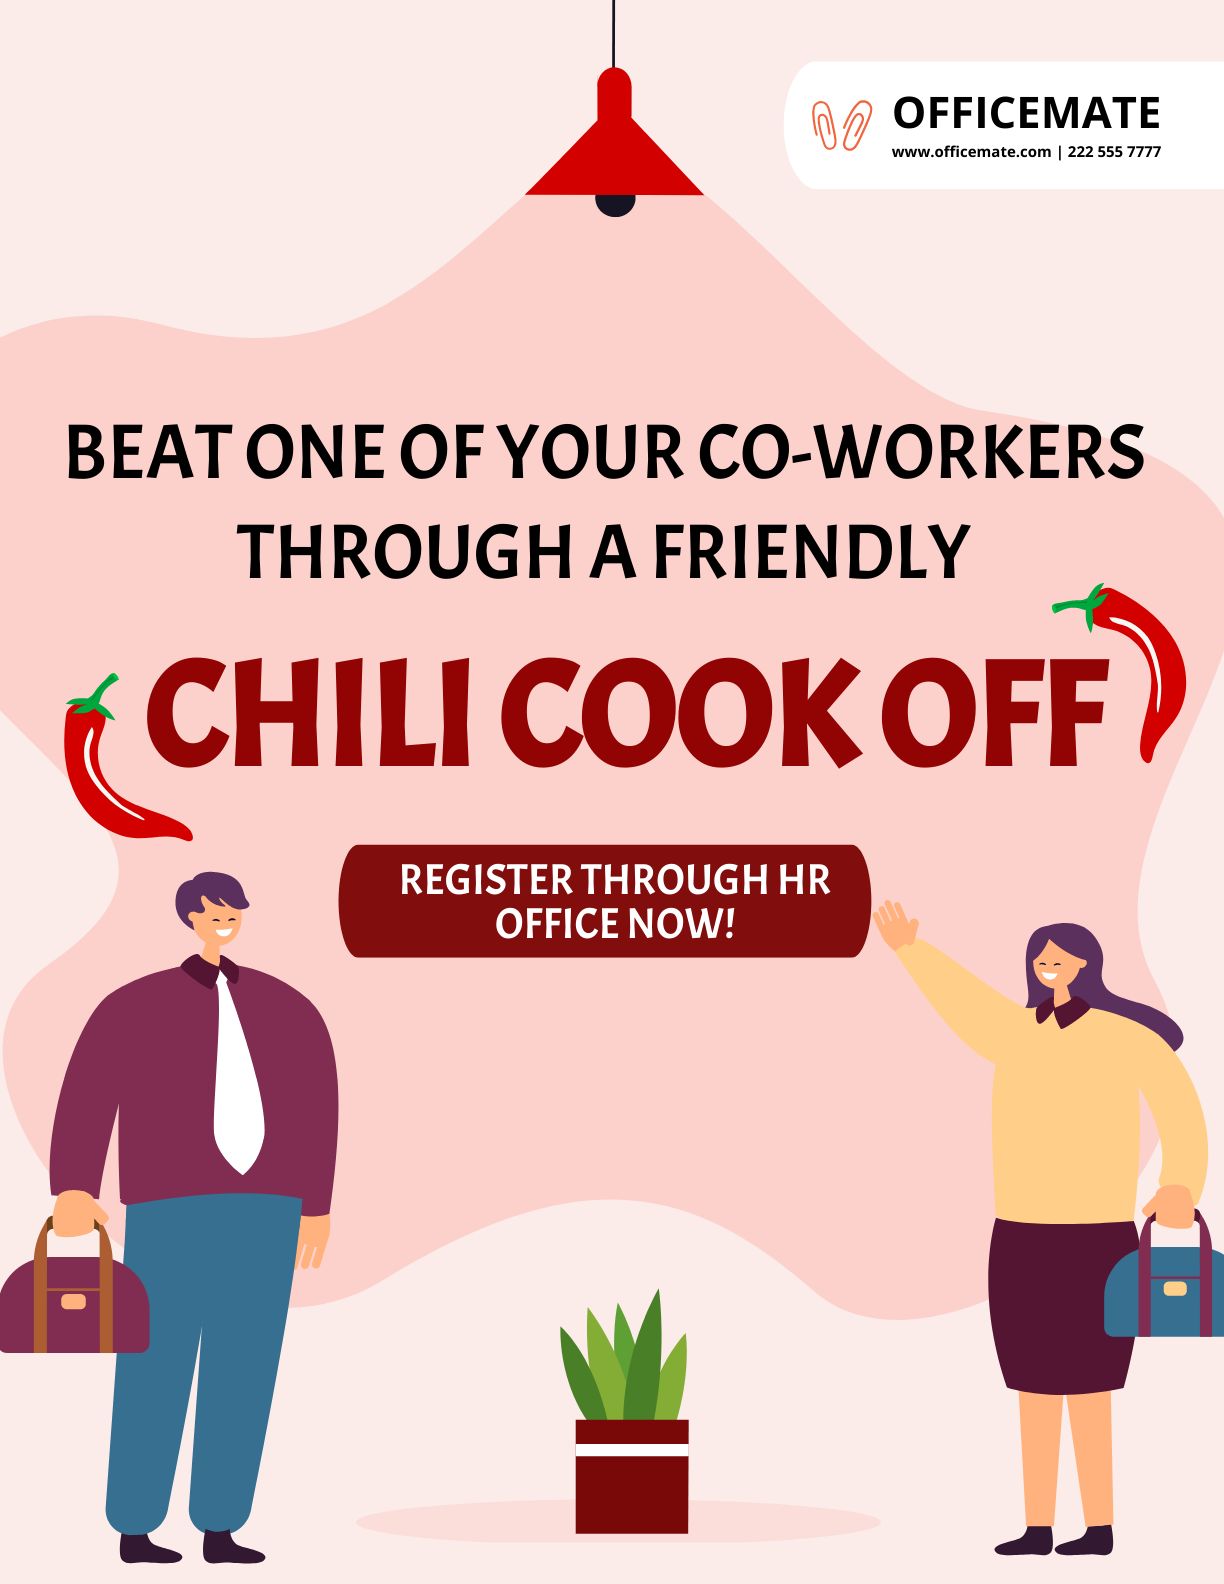 Office chili cook off flyer